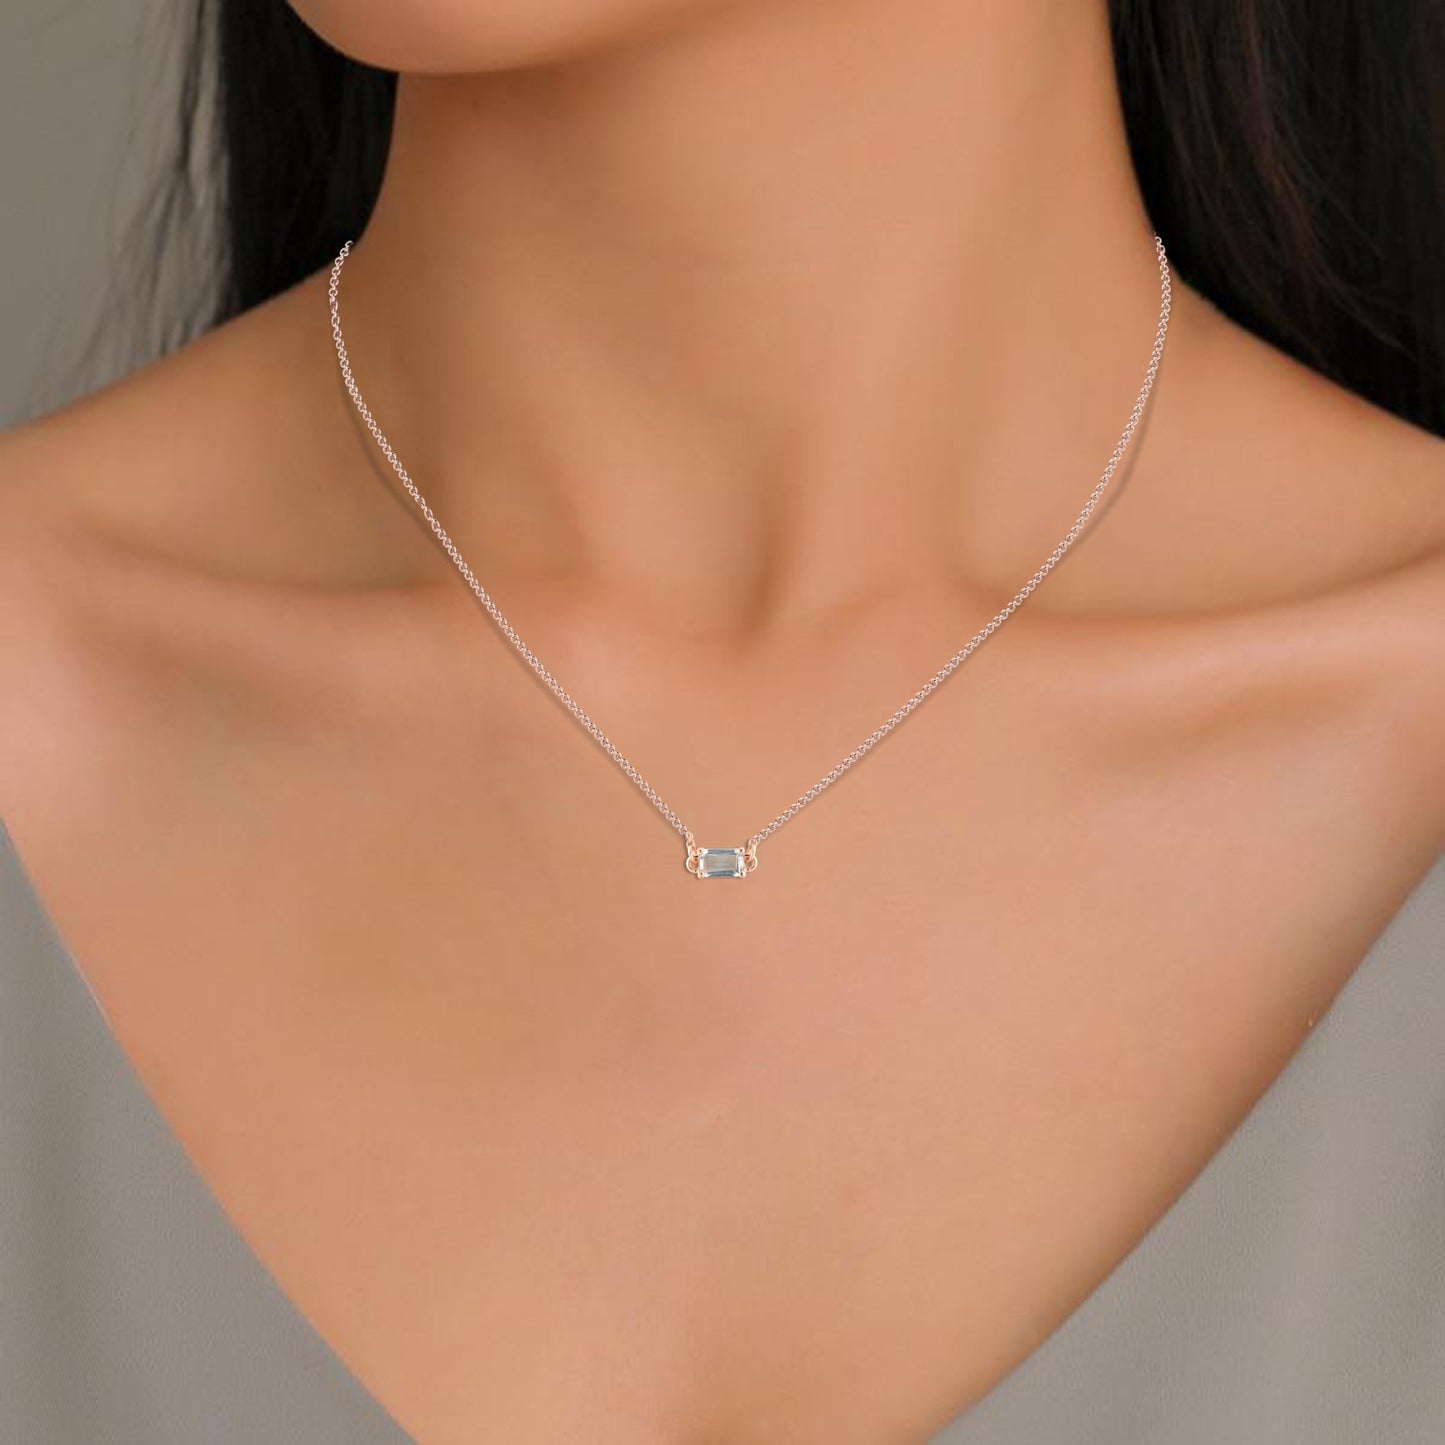 Top Quality Authentic White Topaz Solitaire Necklace In 925 Sterling Silver Emerald Cut Gemstone Jewelry At Offer Price